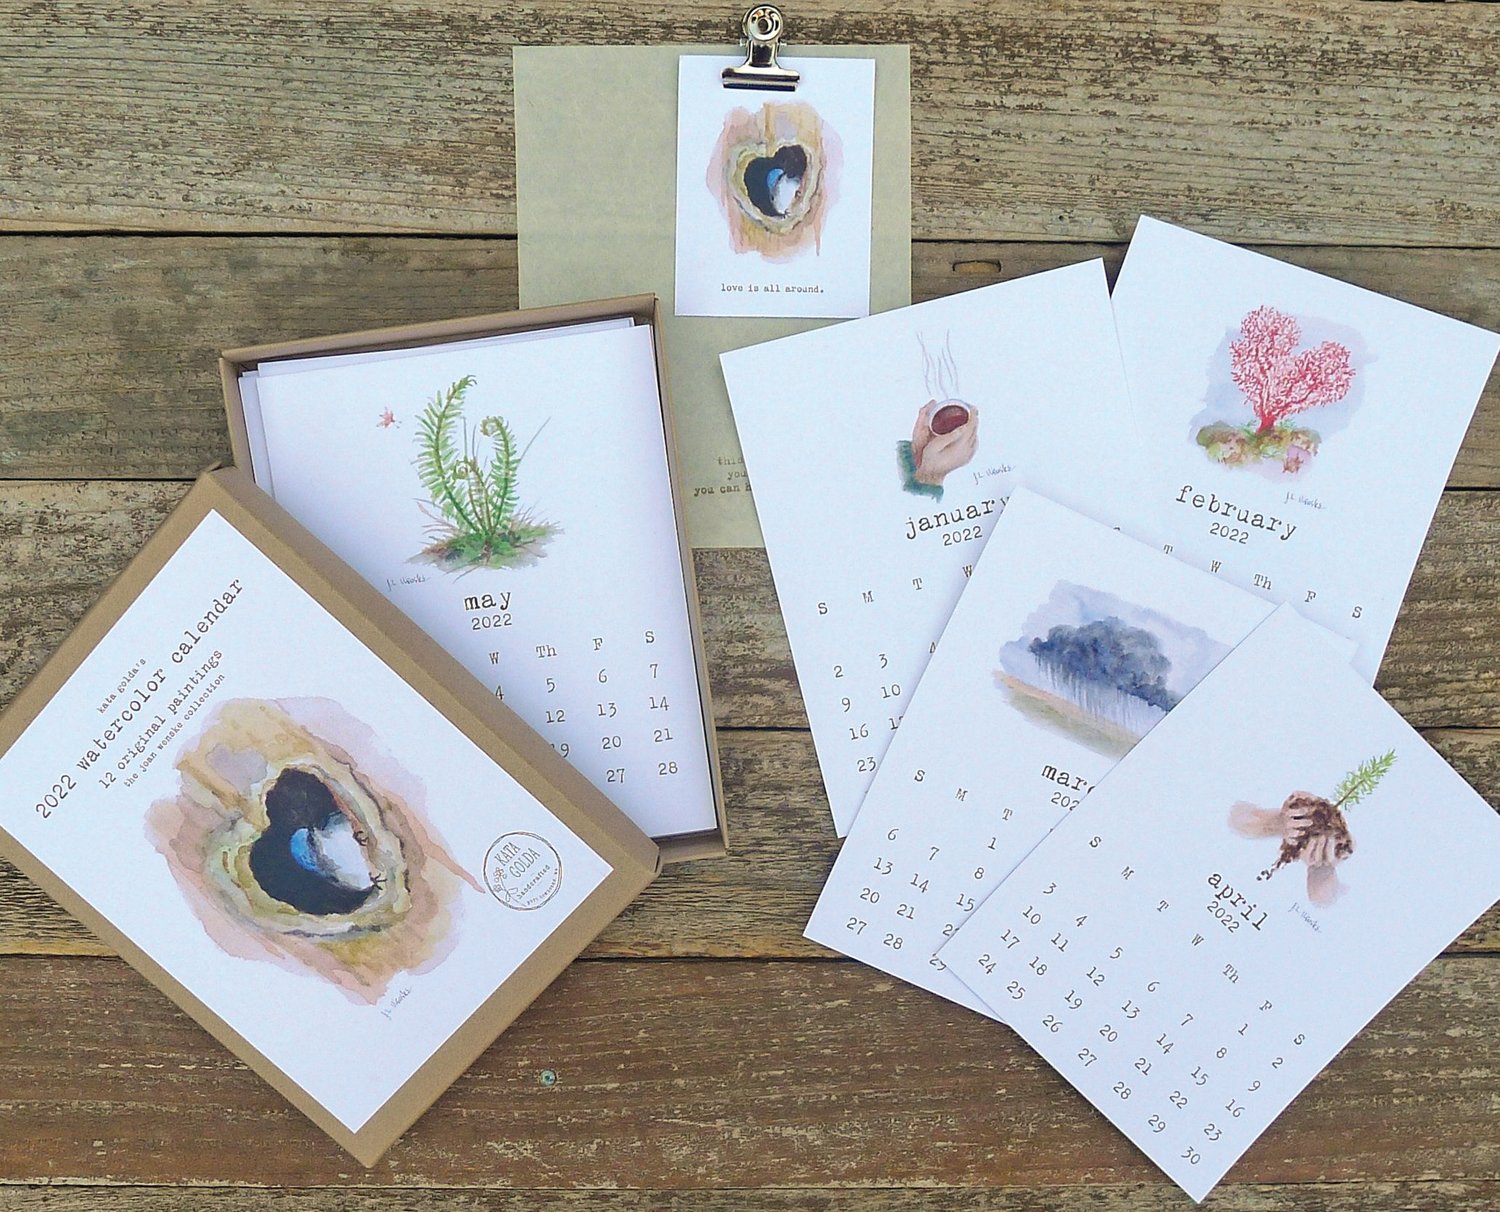 Port Townsend maker Kata Golda has partnered with local watercolorist Joan Wenske to offer a lovely loose-leaf calendar for 2022. Perfect for small spaces, and ready for wrapping.